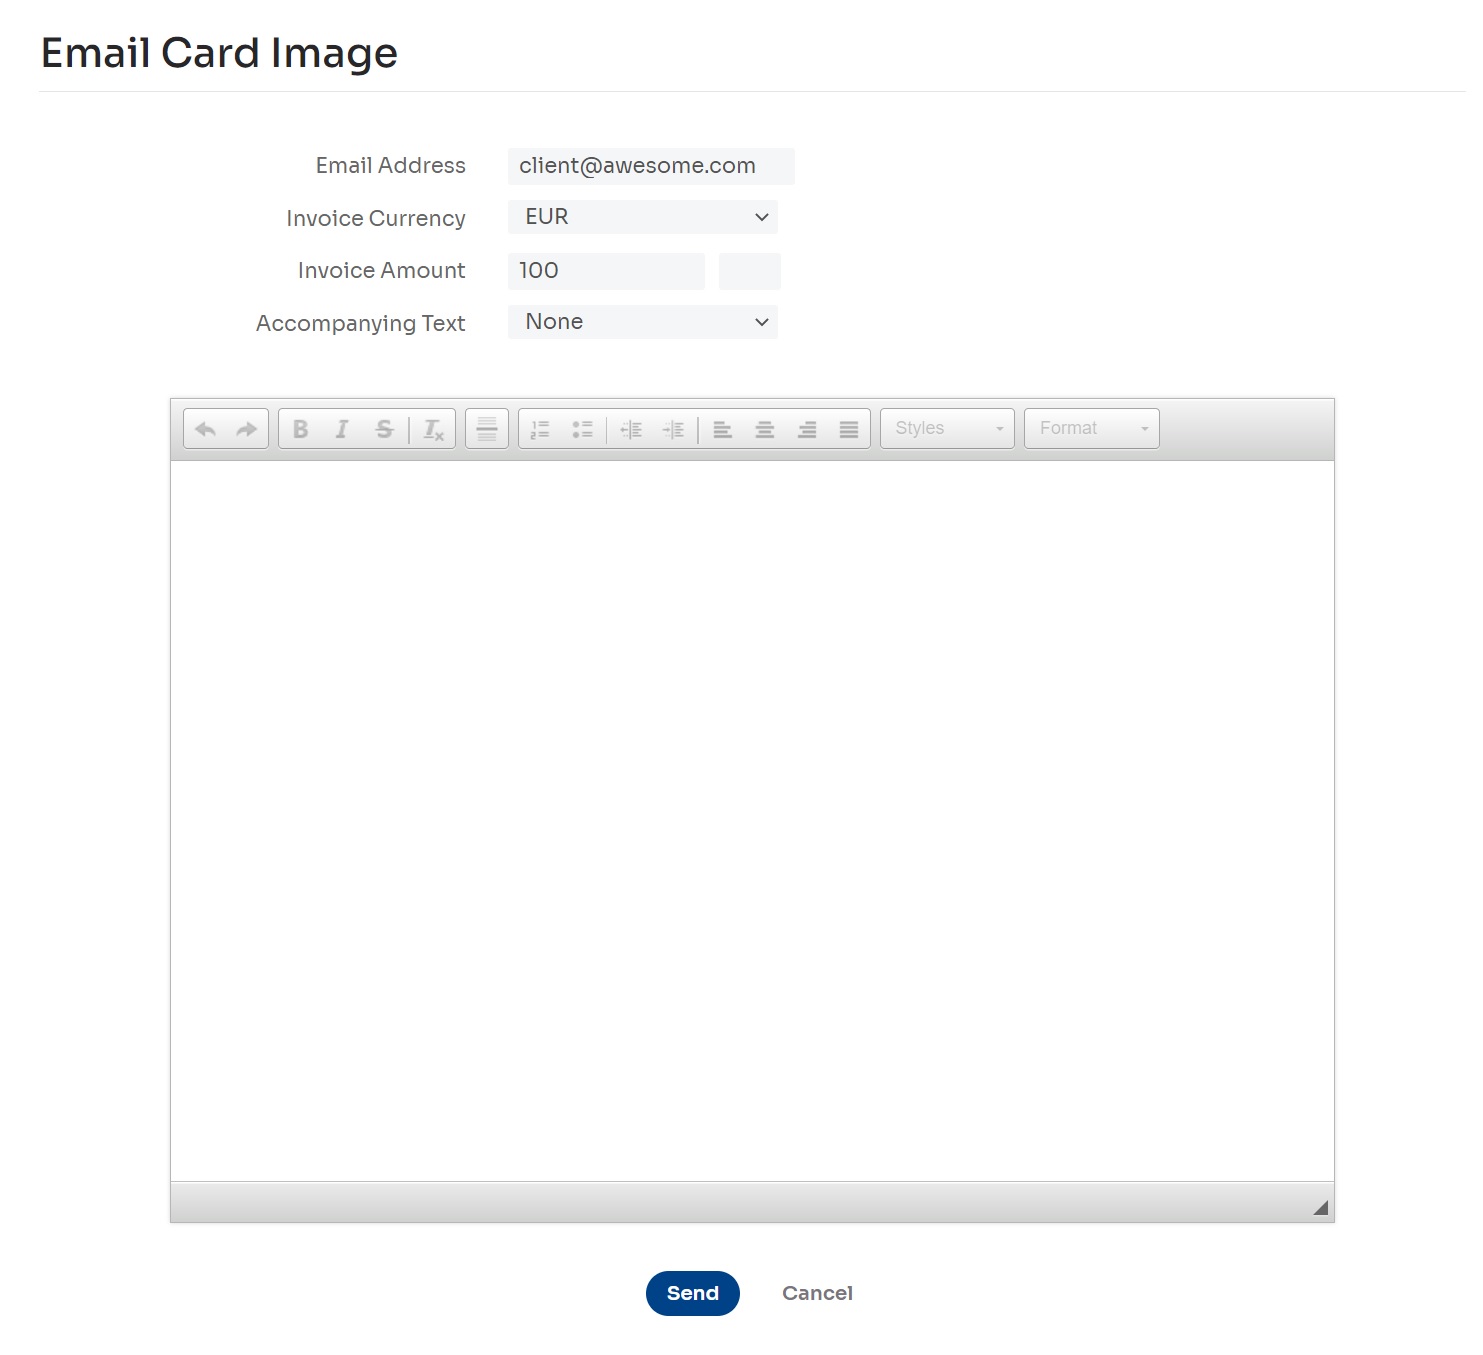 Figure 5: The Email Card Image page

